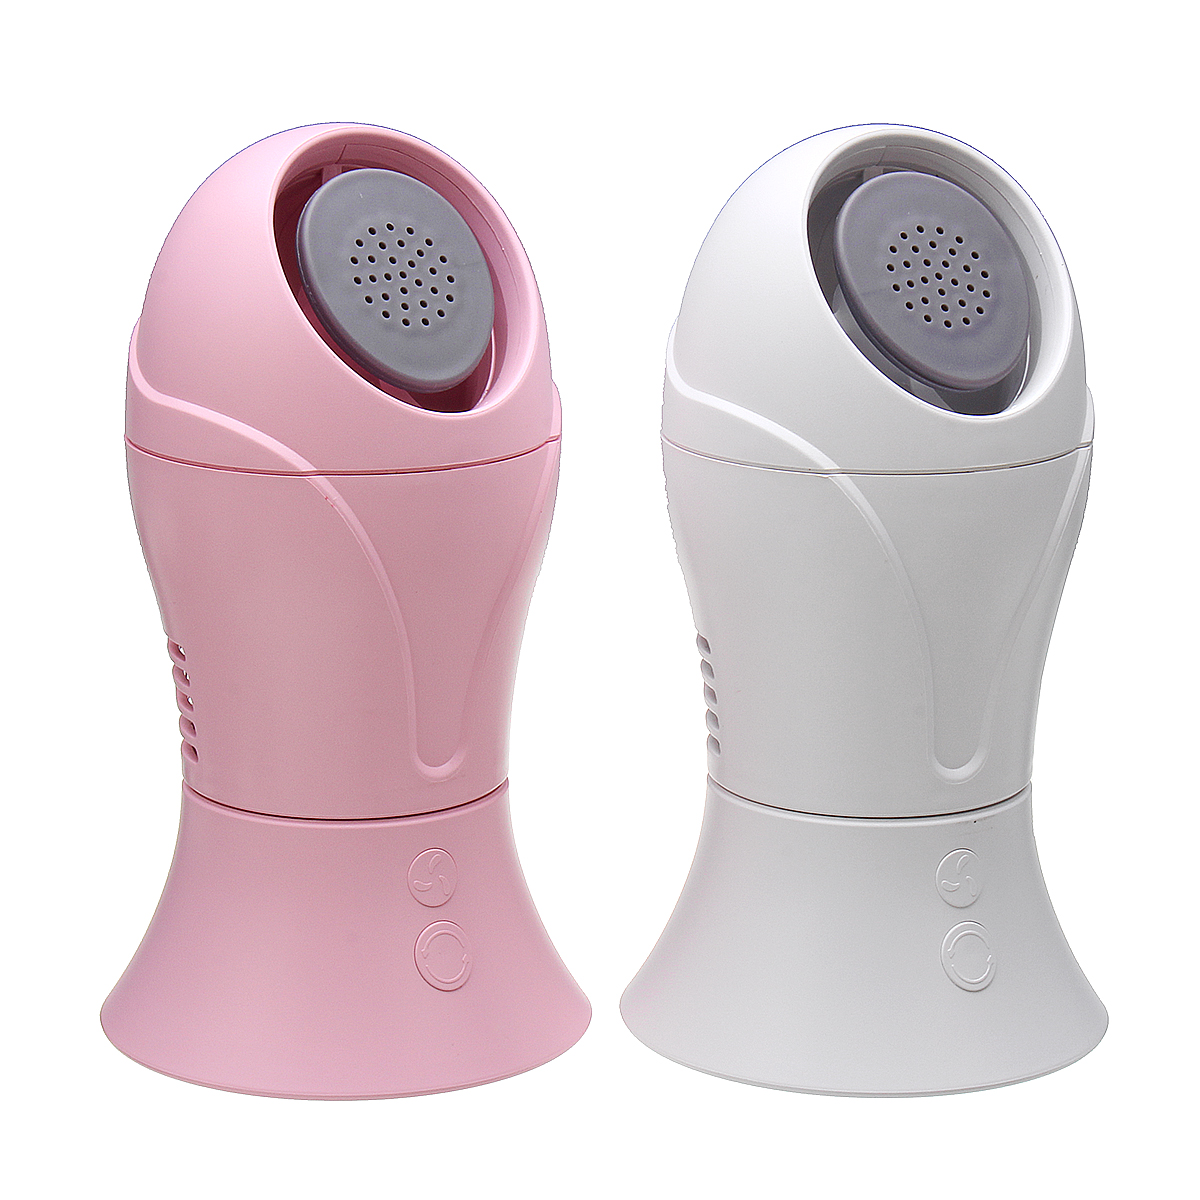 

USB Mini Portable No Leaf Hand Held Air Aromatherapy Cooler